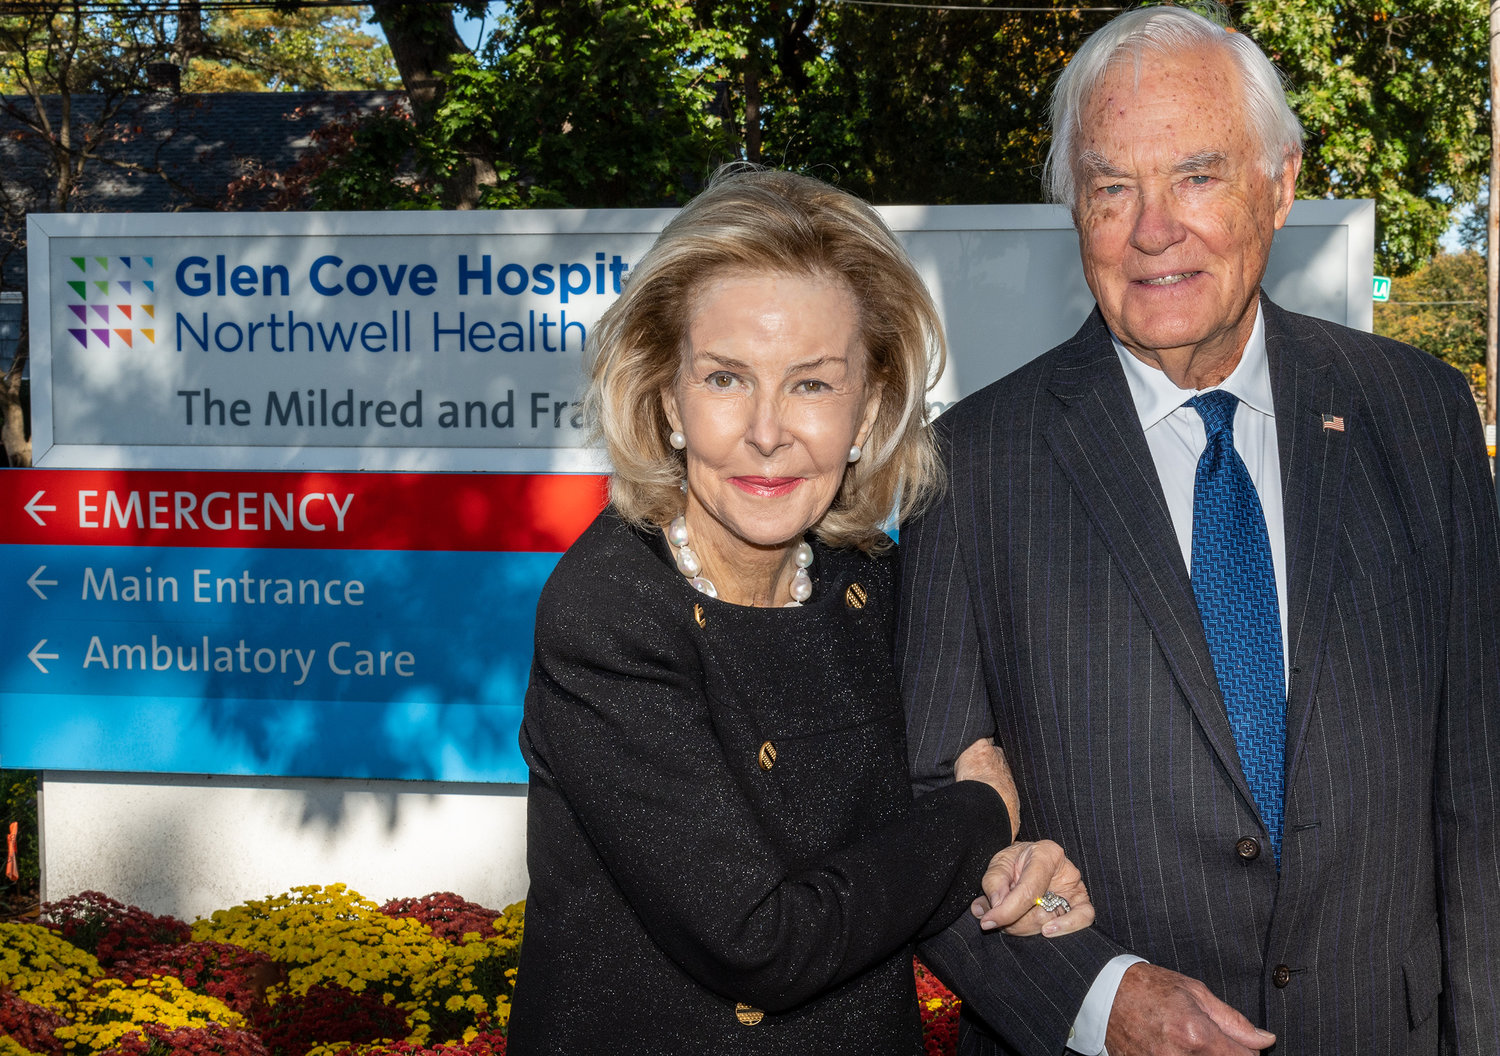 Diana and John Colgate donated $1 million to Glen Cove Hospital for the purchase of an in-house MRI.